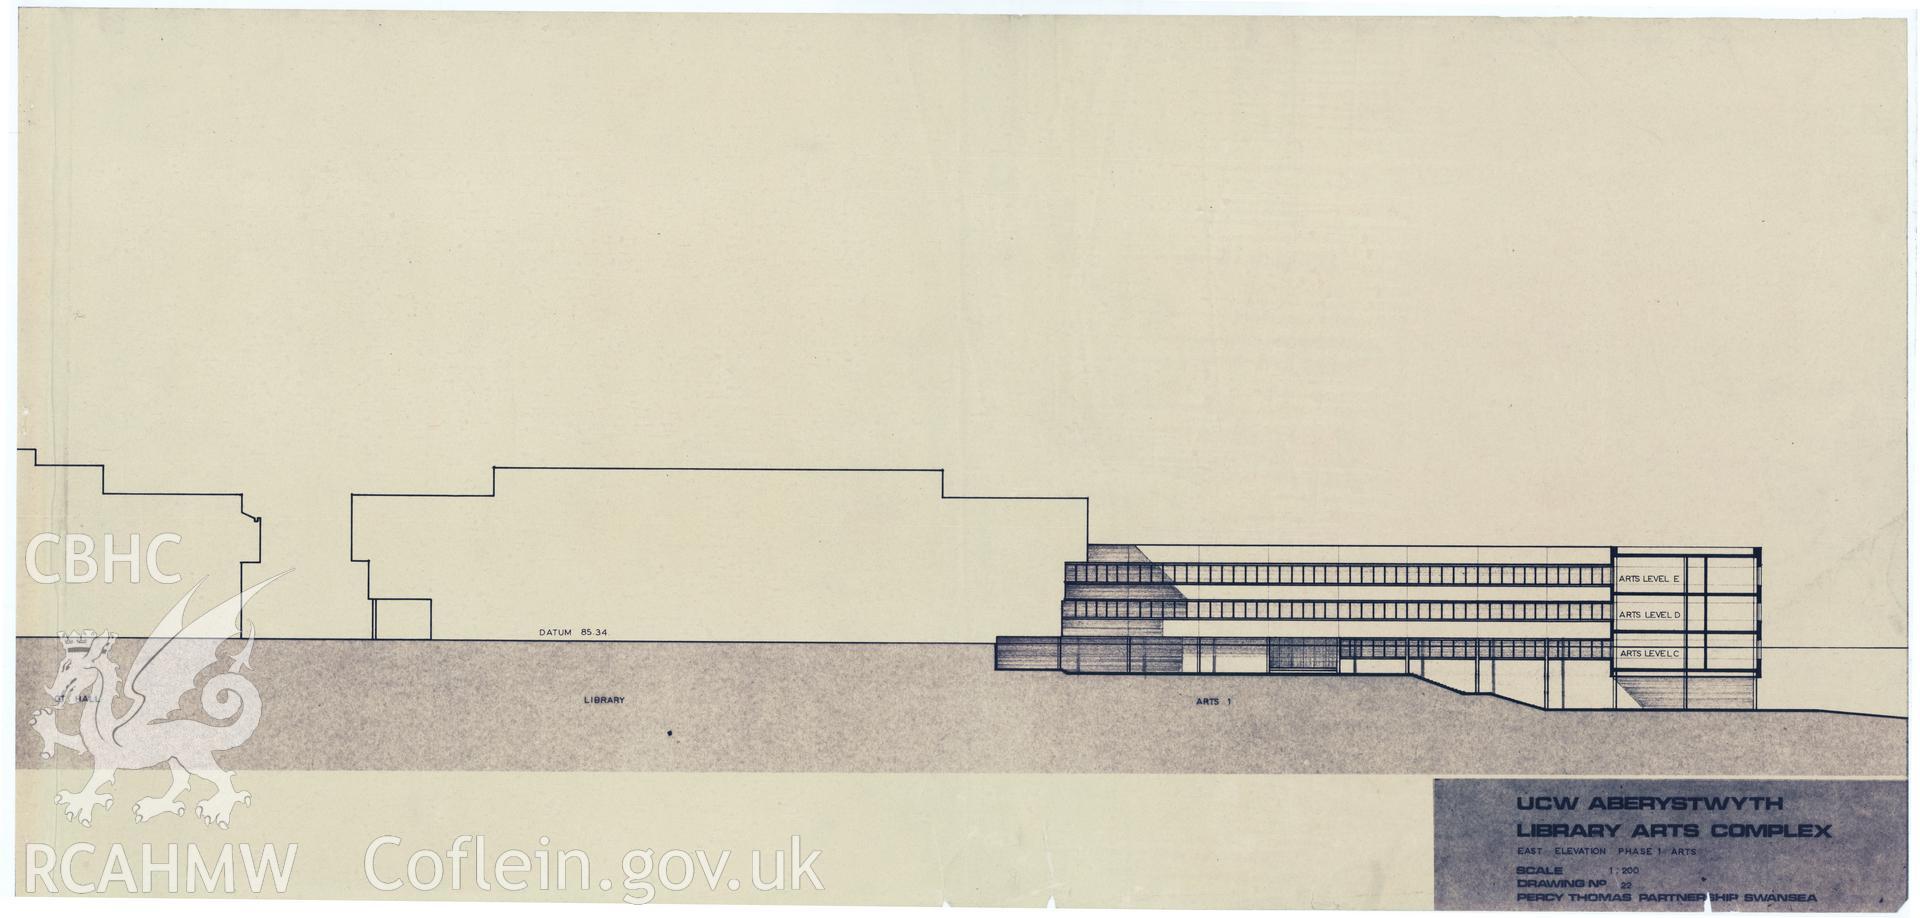 Digital copy of Drawing No 22, east elevation phase 1 arts at the proposed Library Arts Complex at University College Aberystwyth, produced by Percy Thomas Partnership. Scale 1:200.